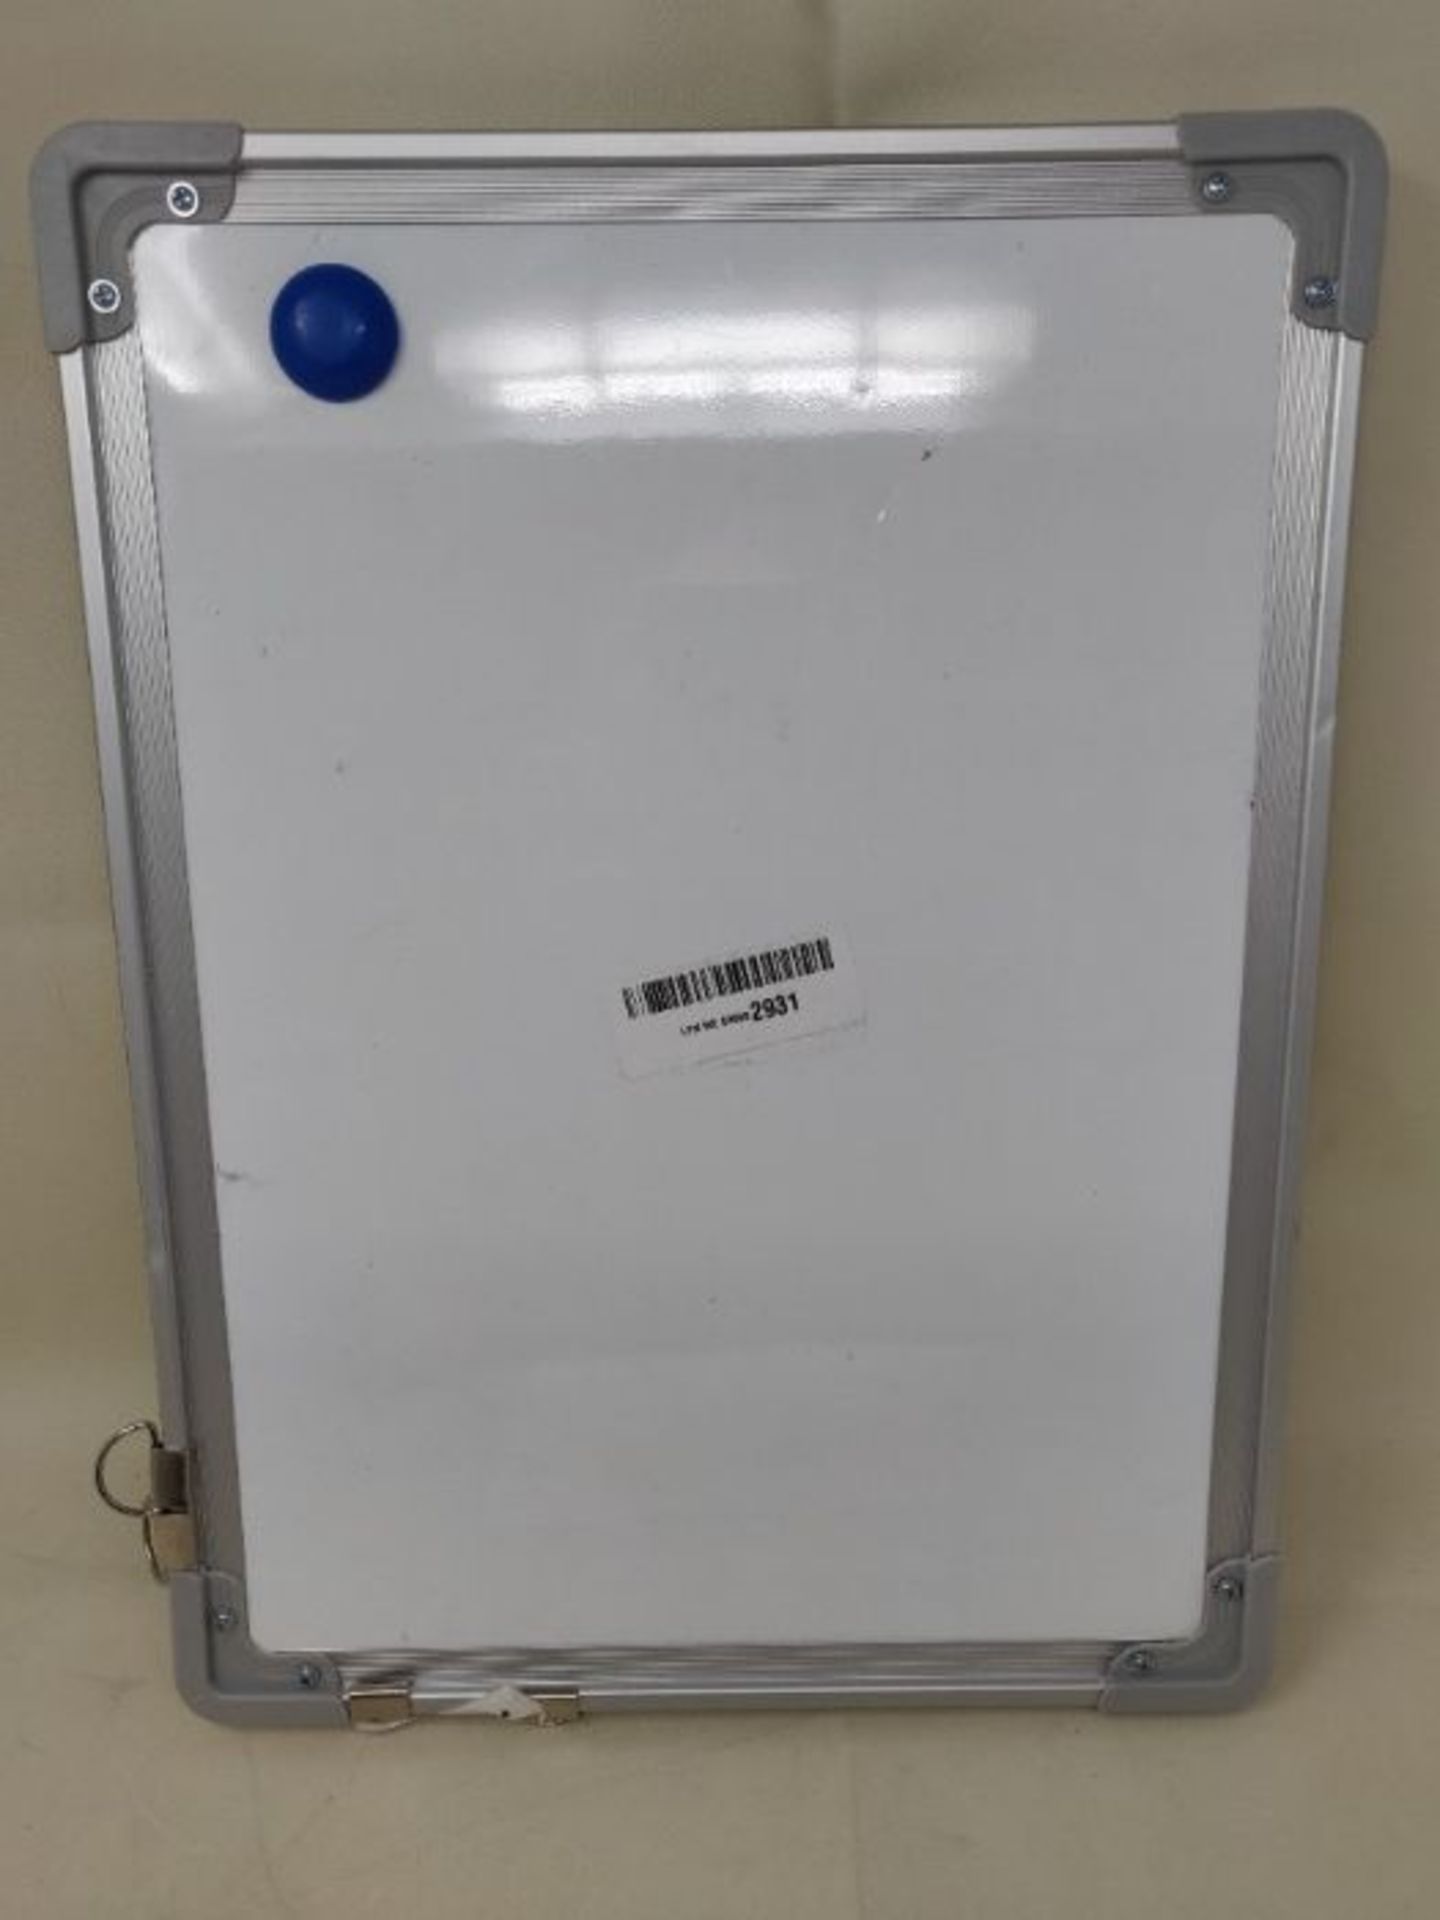 Small Dry Erase White Board, ARCOBIS A3 Whiteboard 40 x 30 cm Magnetic Hanging Double- - Image 2 of 2